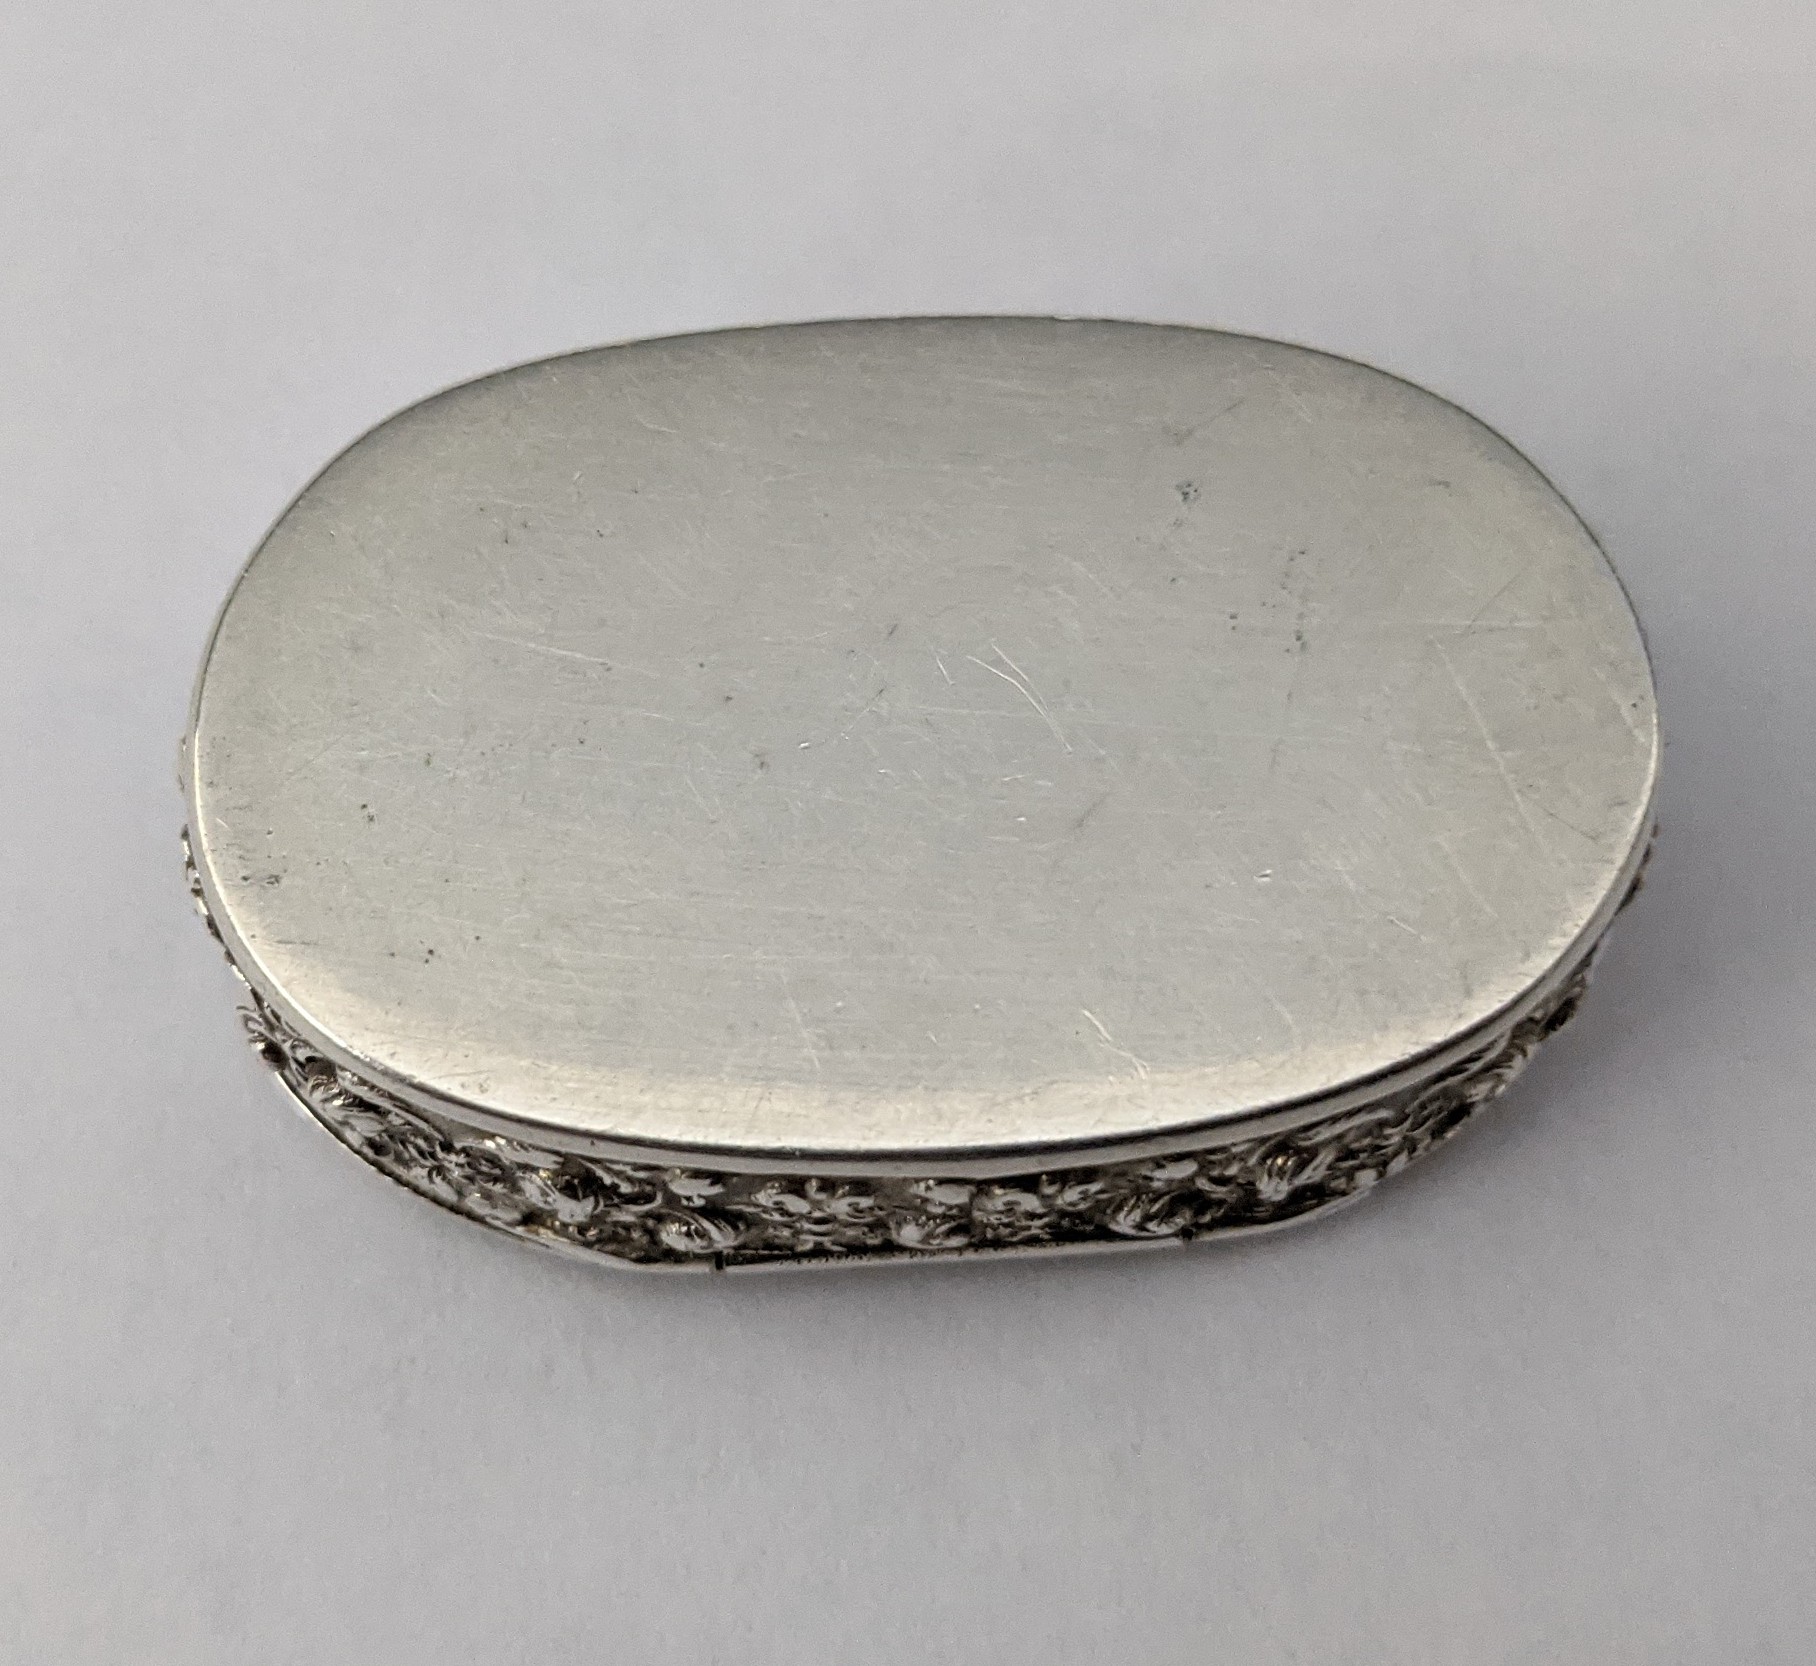 Unmarked silver snuff box | Antiques Board